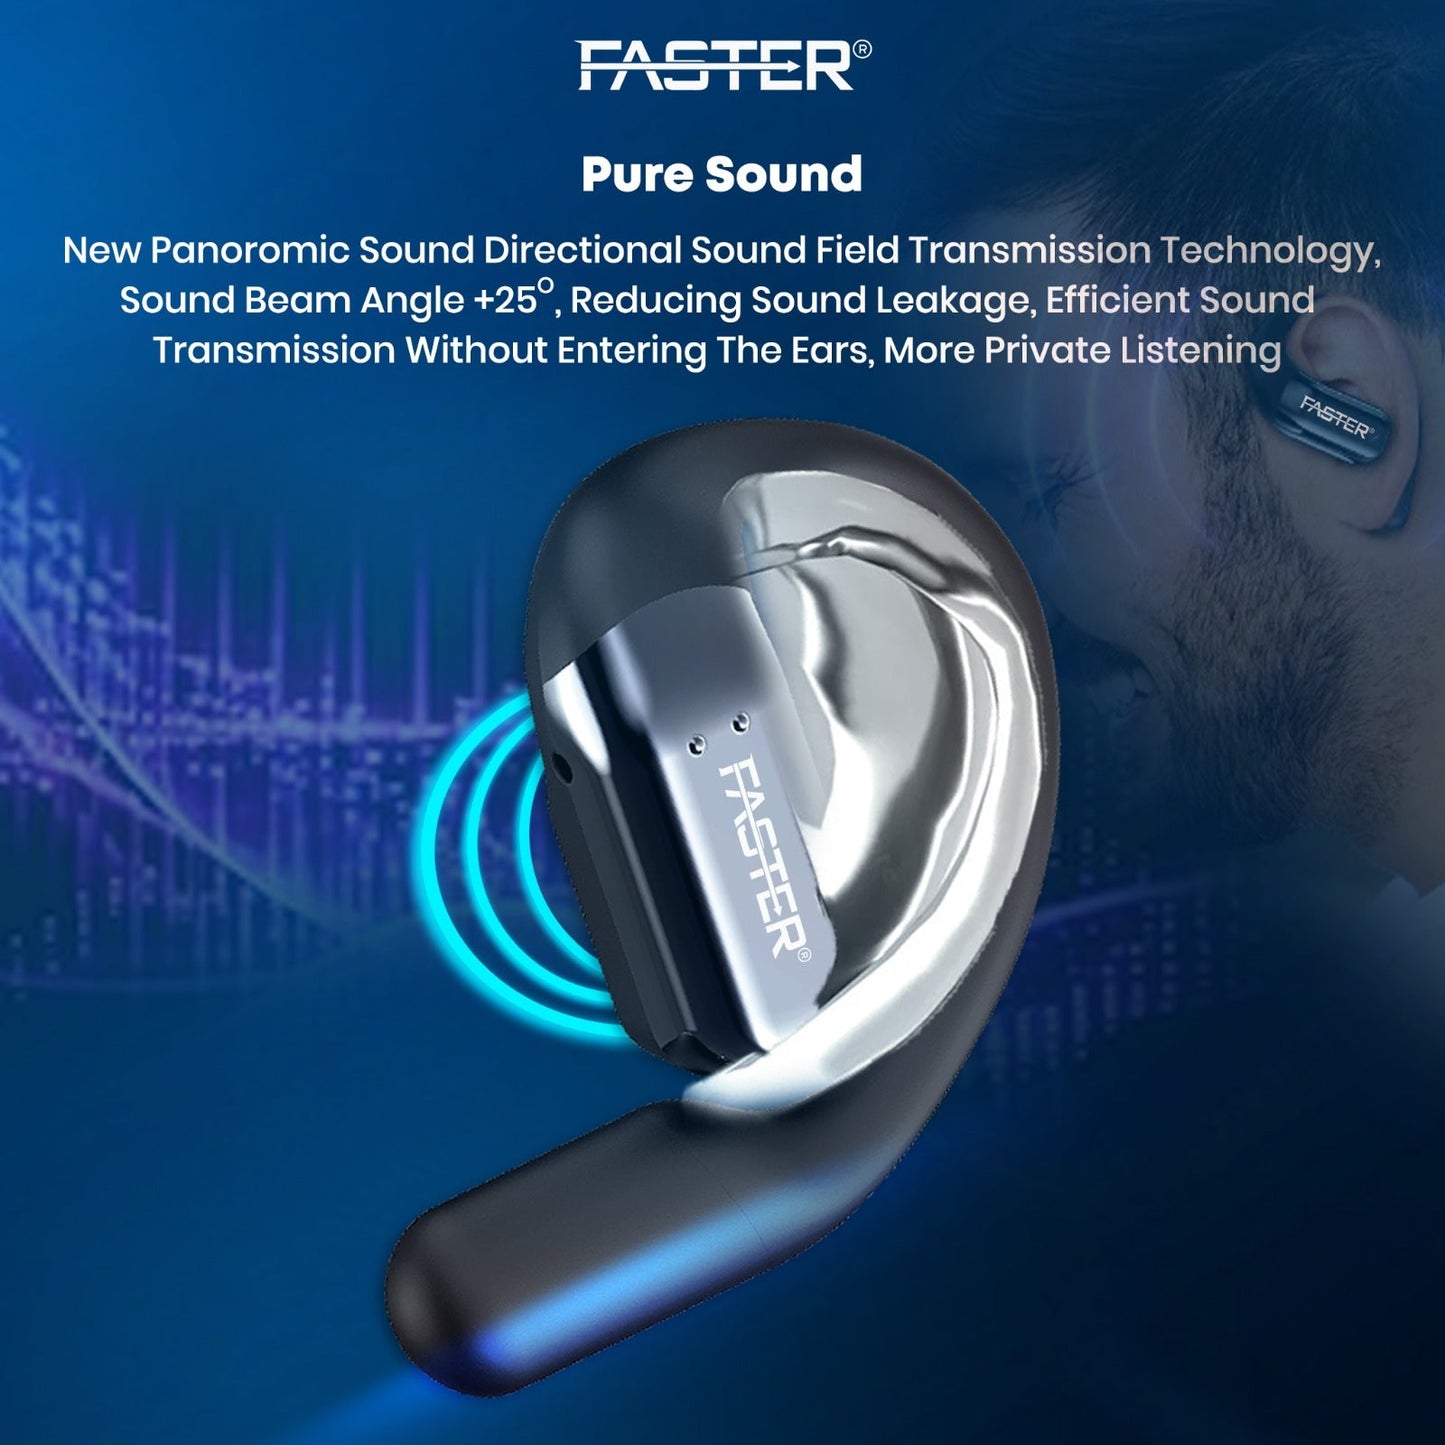 FASTER R18 OWS AirVibe ENC Noise-Cancellation Earphones